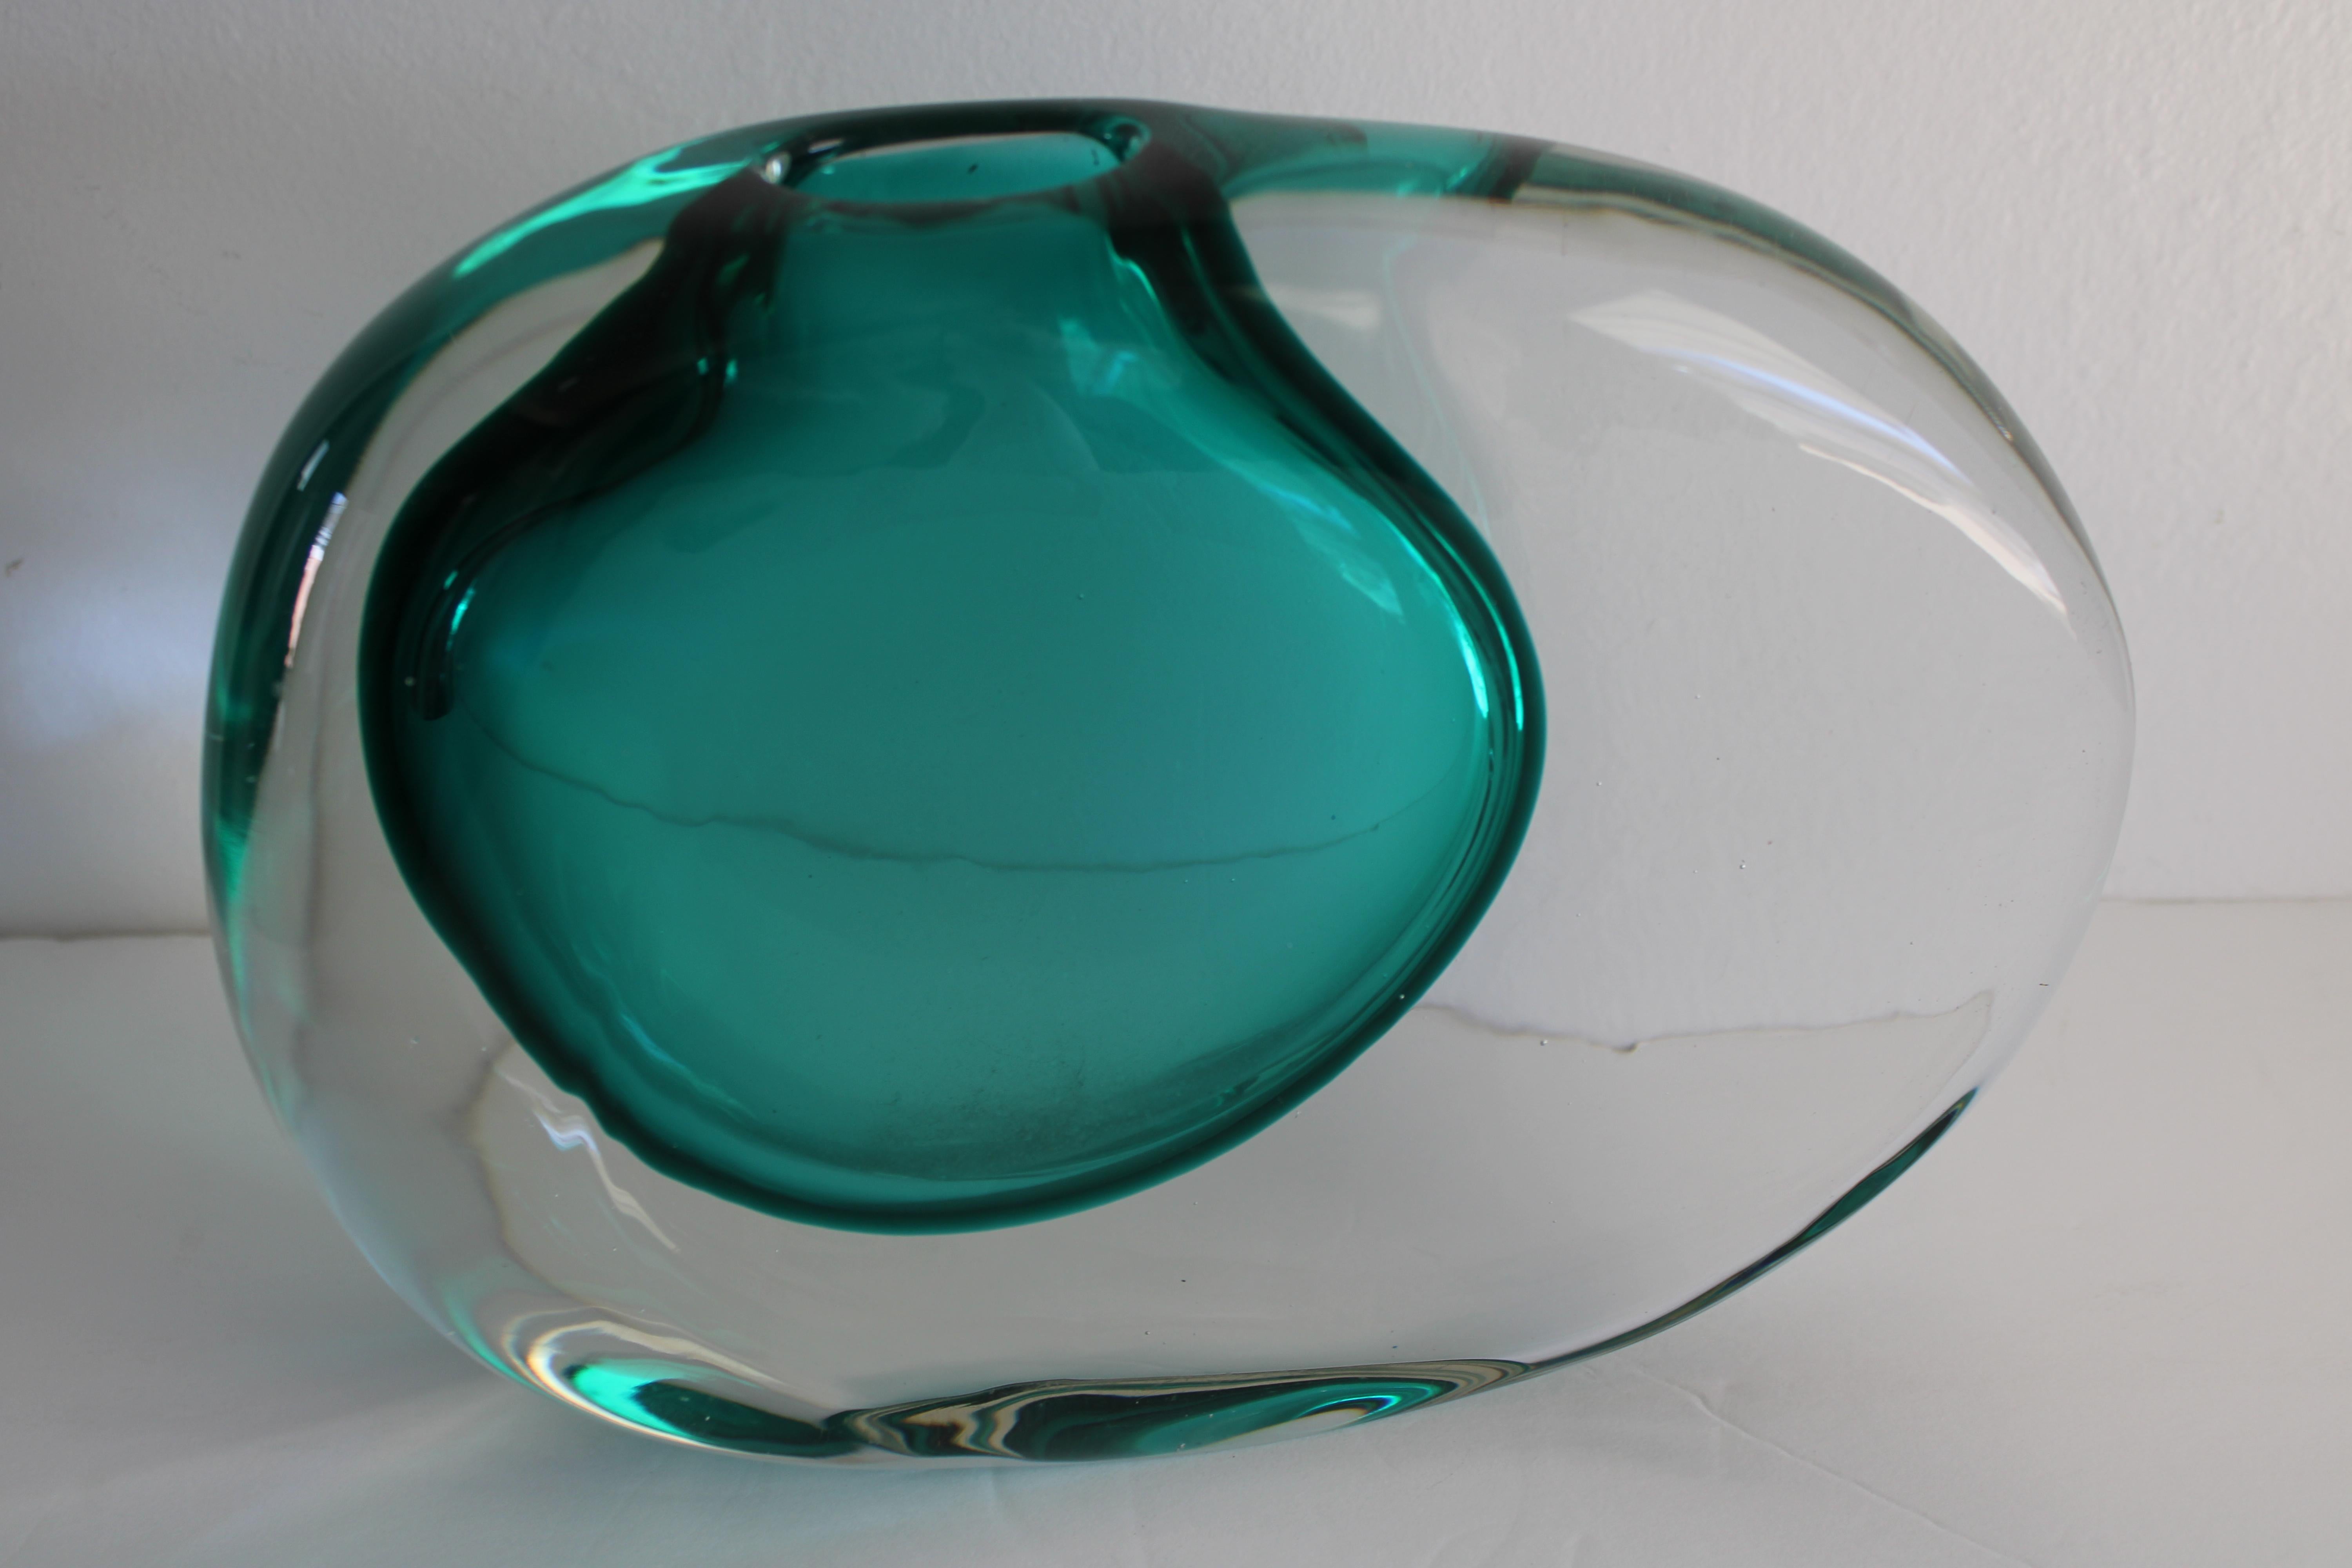 Italian glass vase by Fabio Tosi for the Cenedese Glass Company in Murano, Italy. Vase measures 10.75